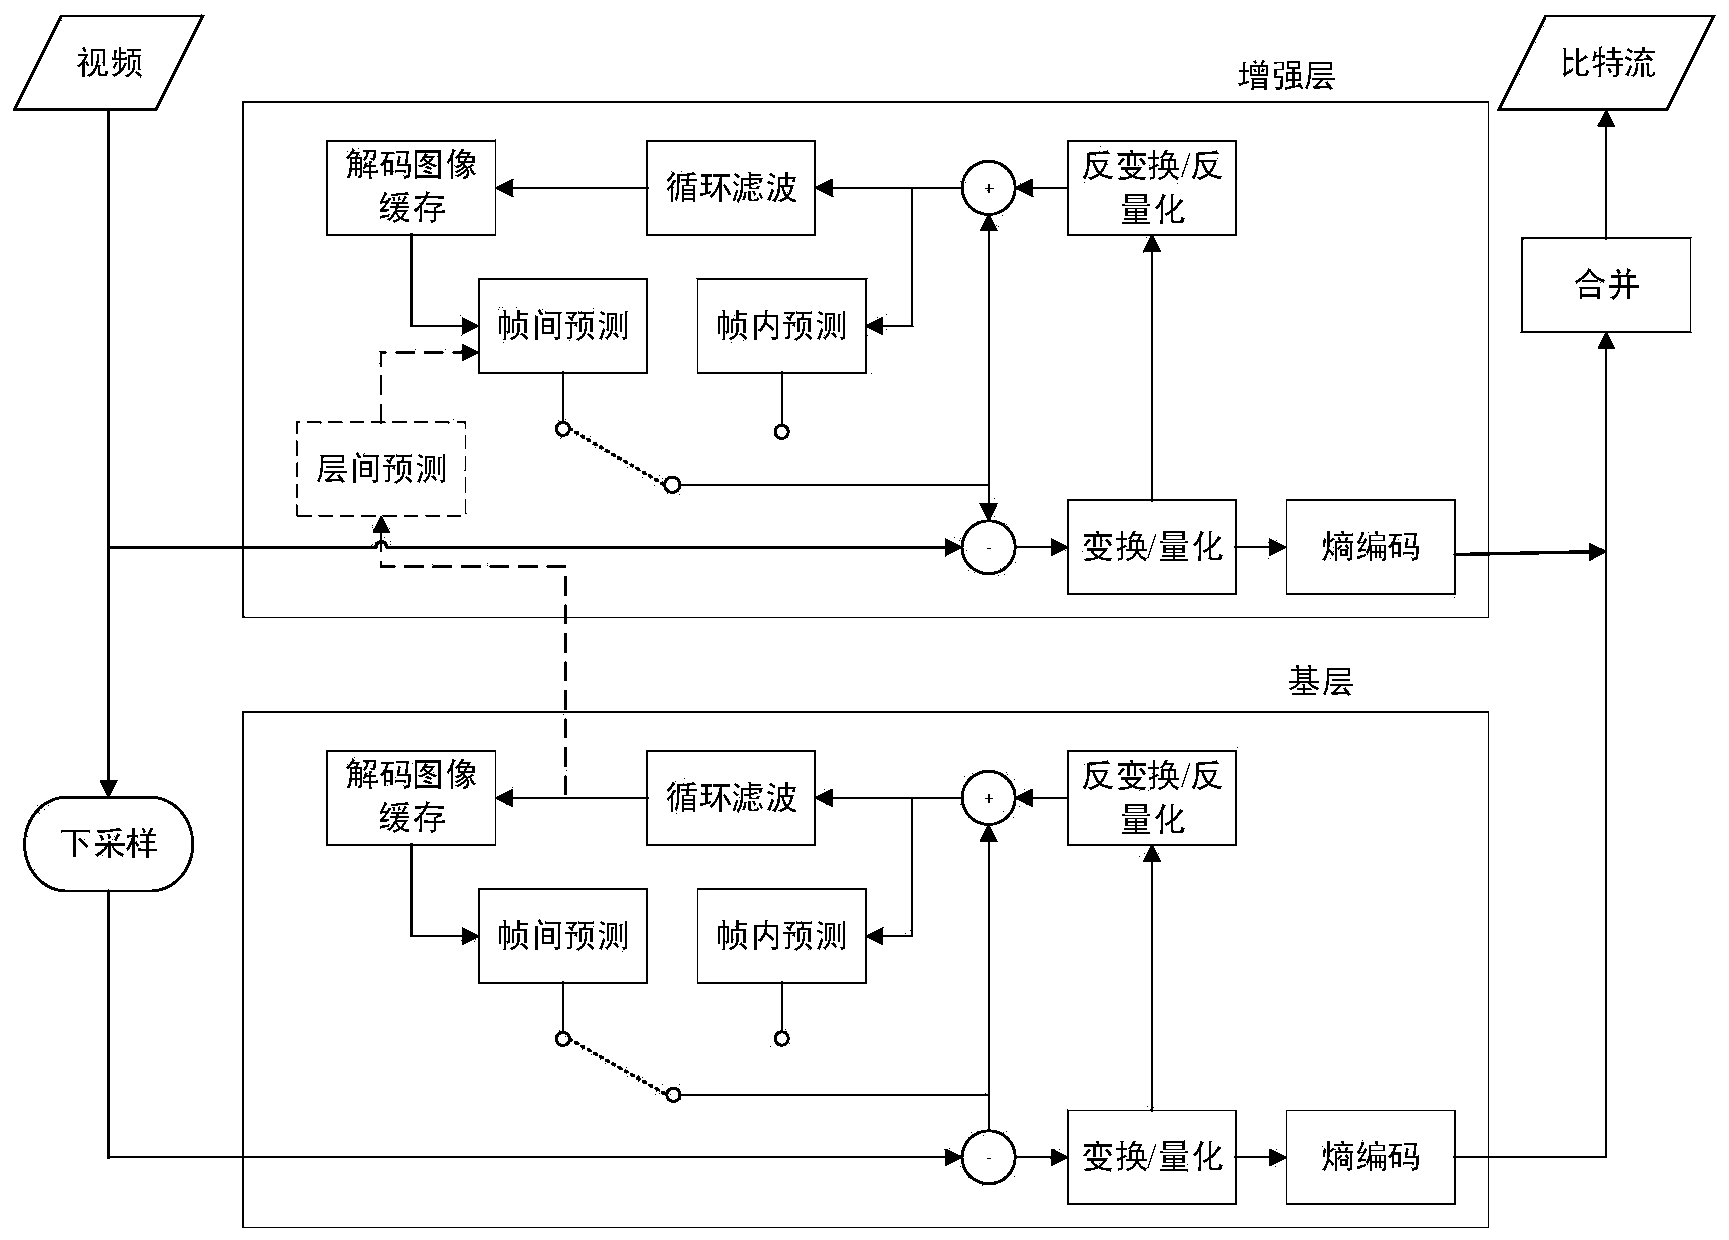 Method for quality scalable HEVC (high efficiency video coding)